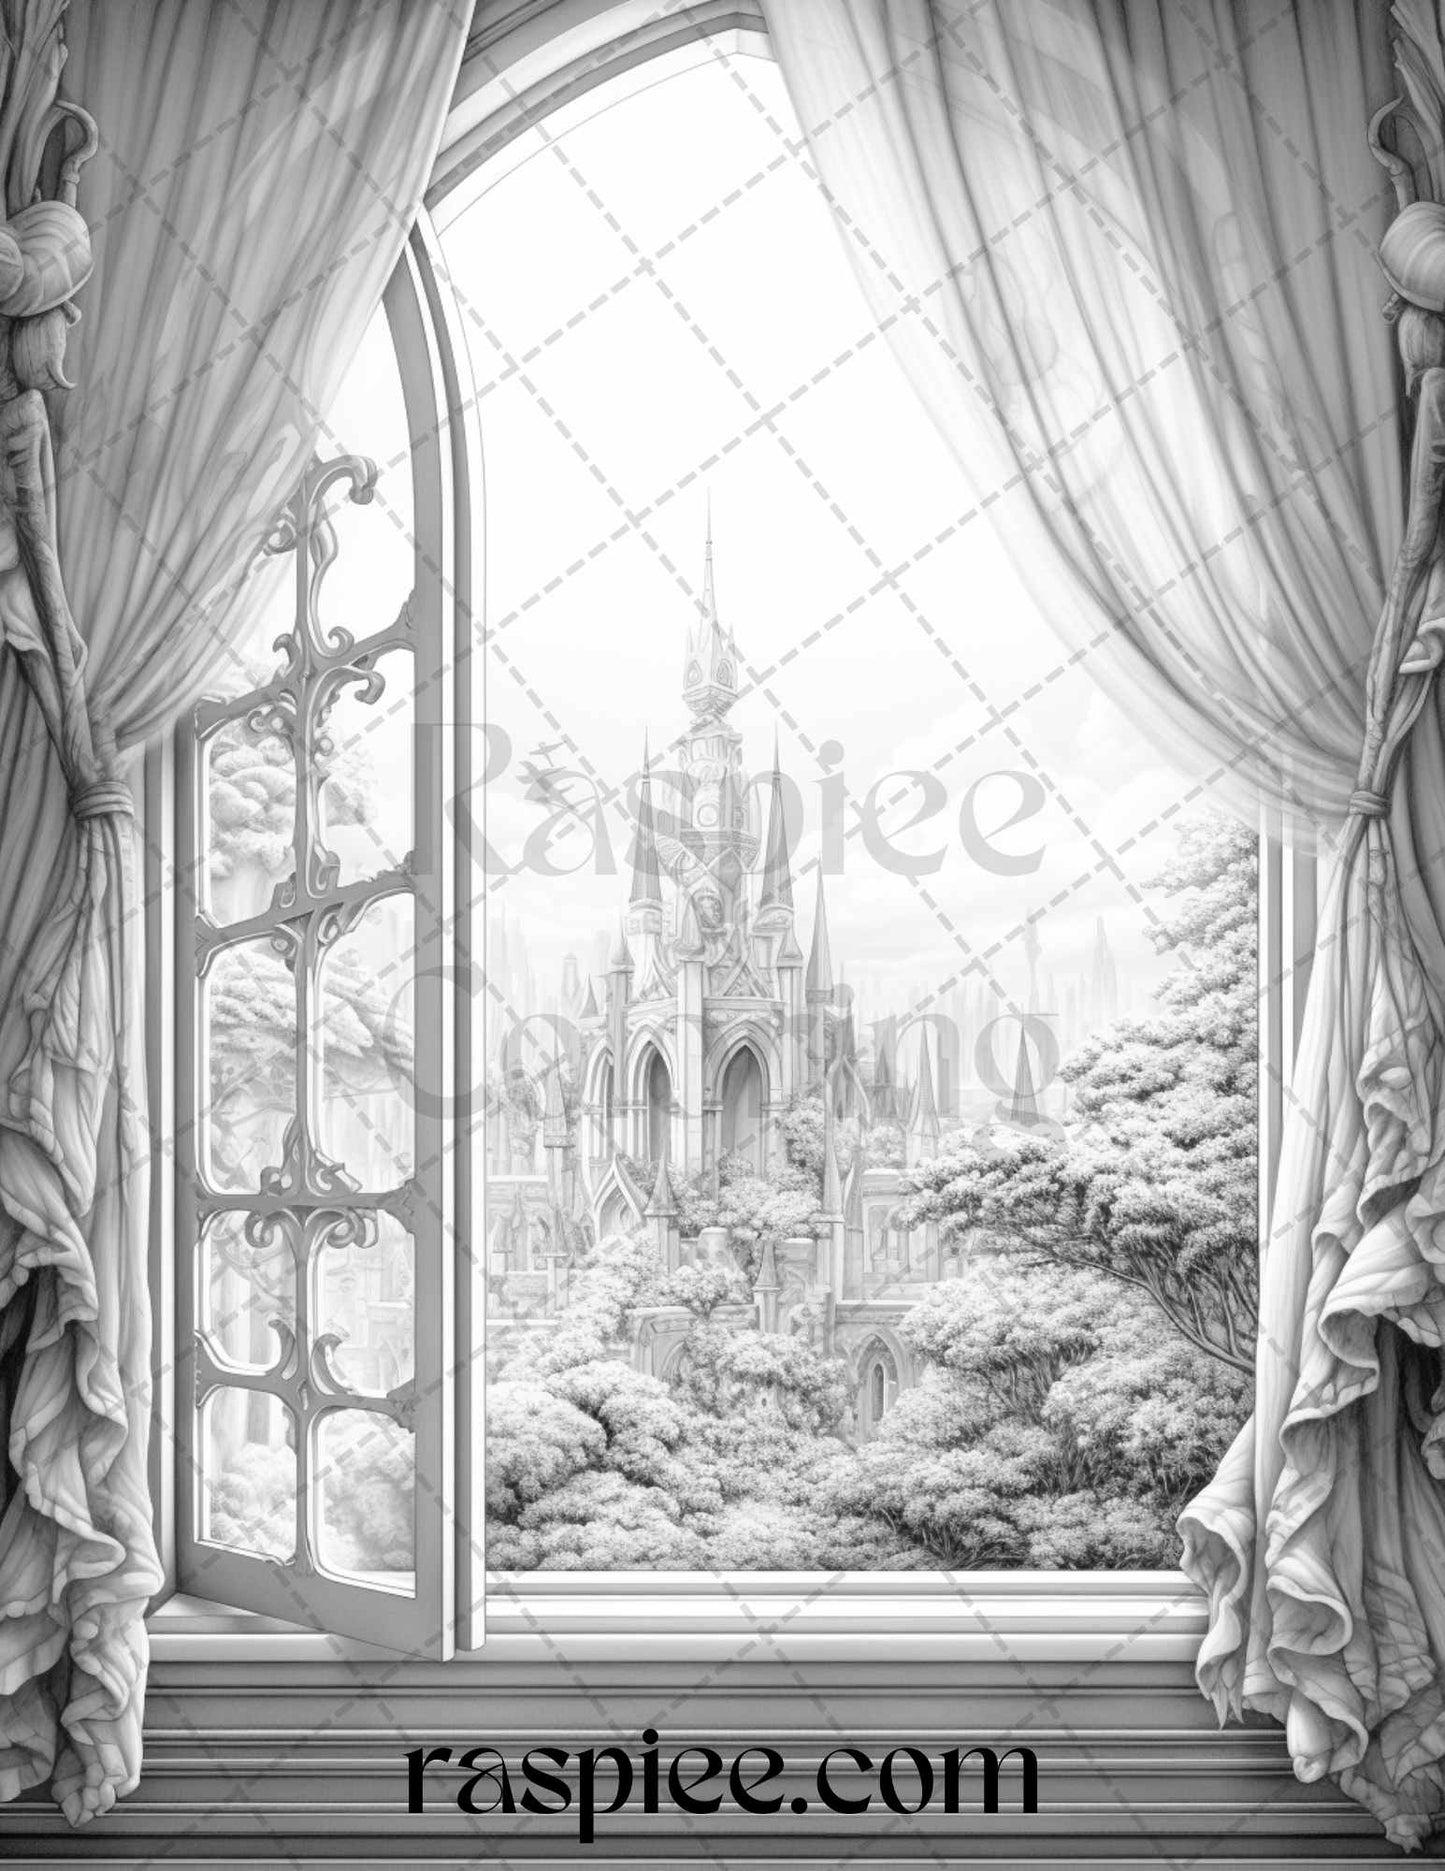 40 Window to Fantasy Worlds Grayscale Coloring Pages Printable for Adults, PDF File Instant Download - raspiee